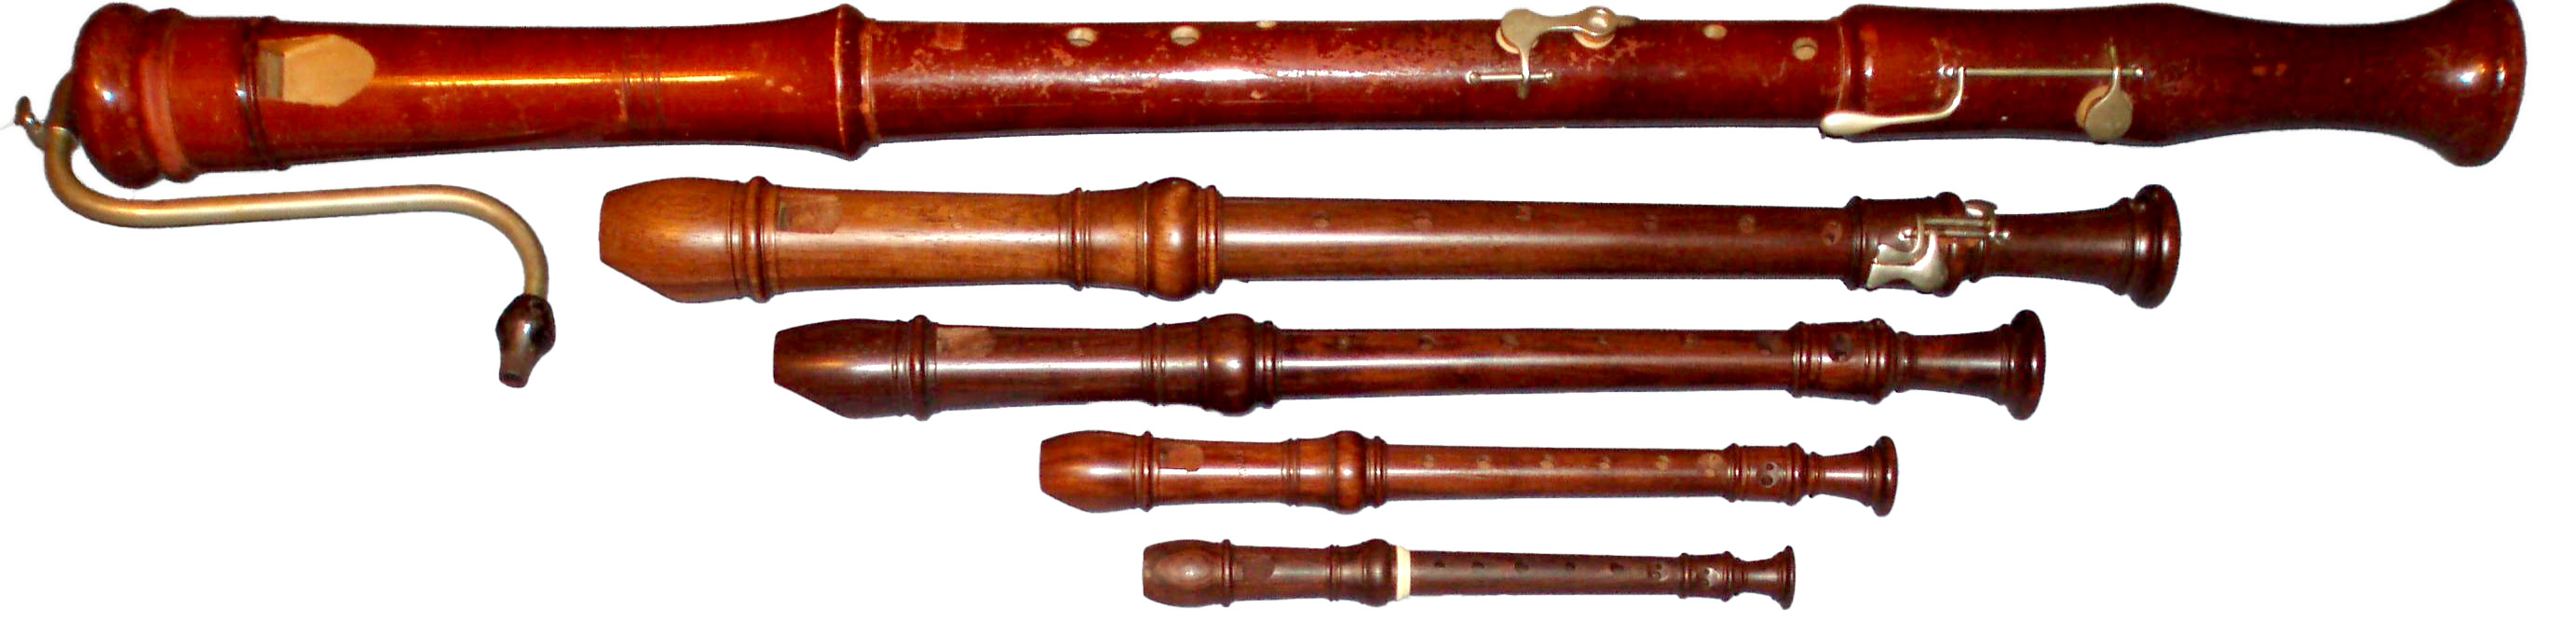 different sizes of recorders